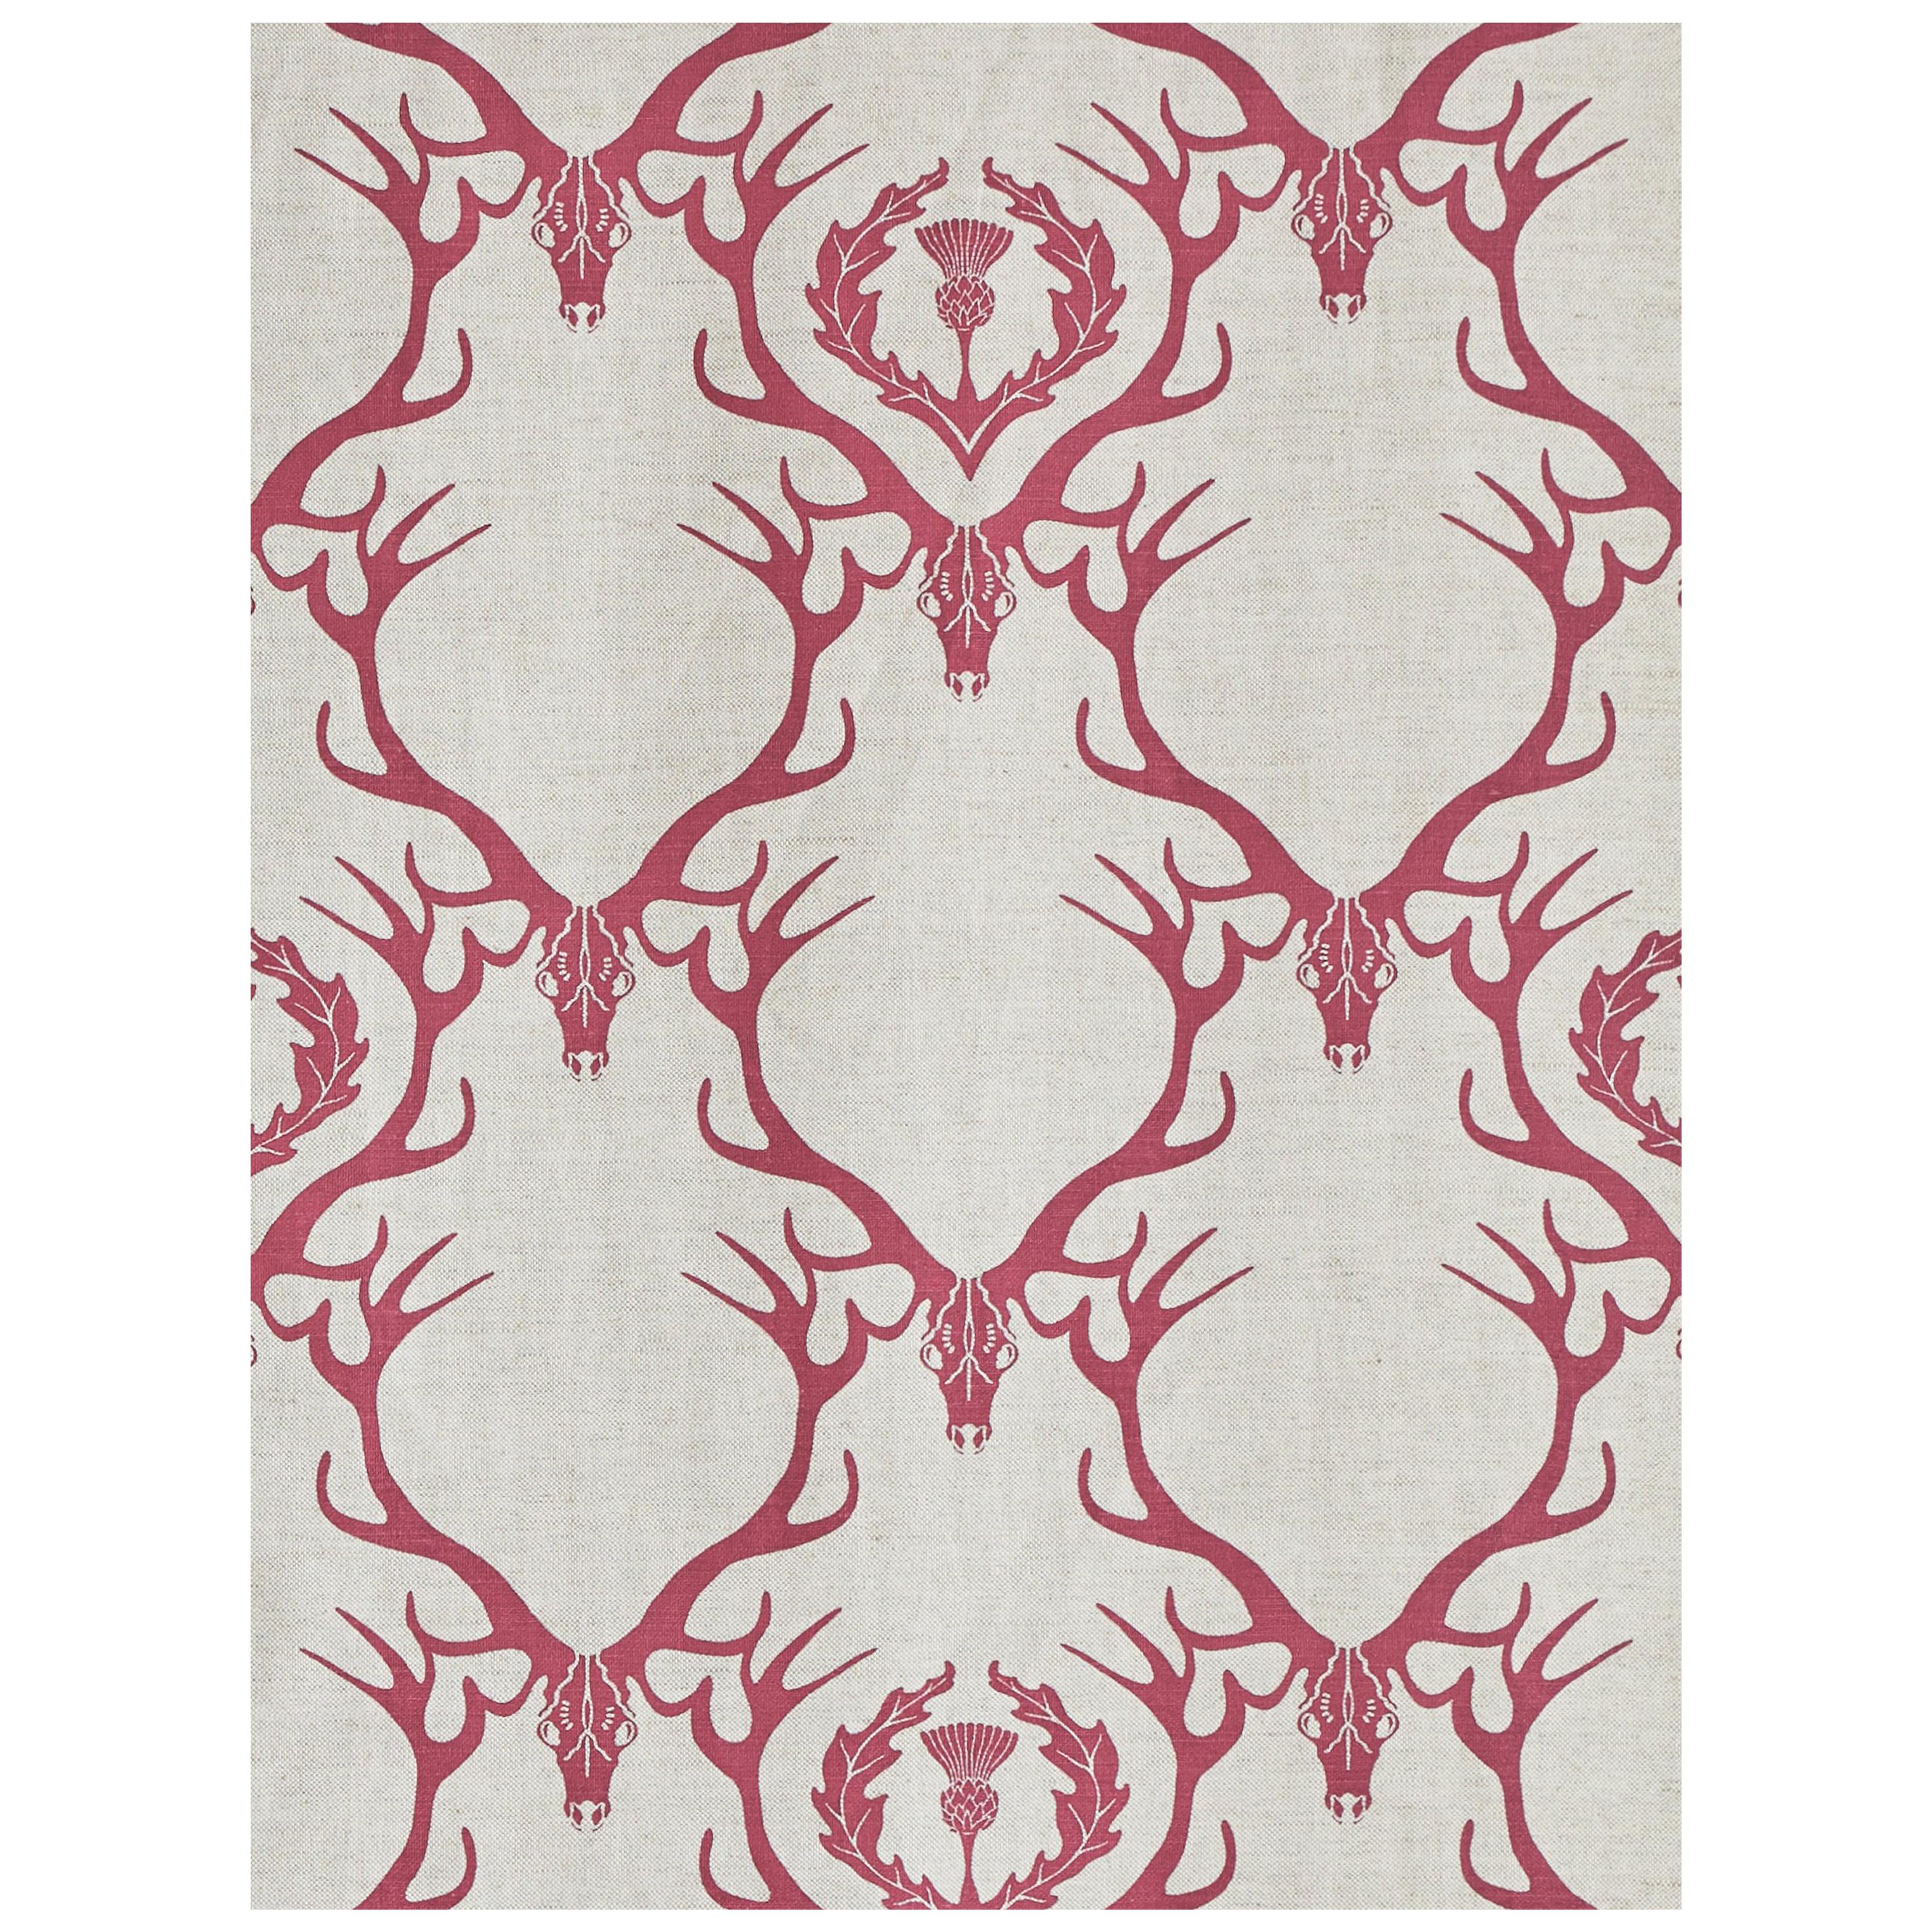 'Deer Damask' Contemporary, Traditional Fabric in Claret For Sale